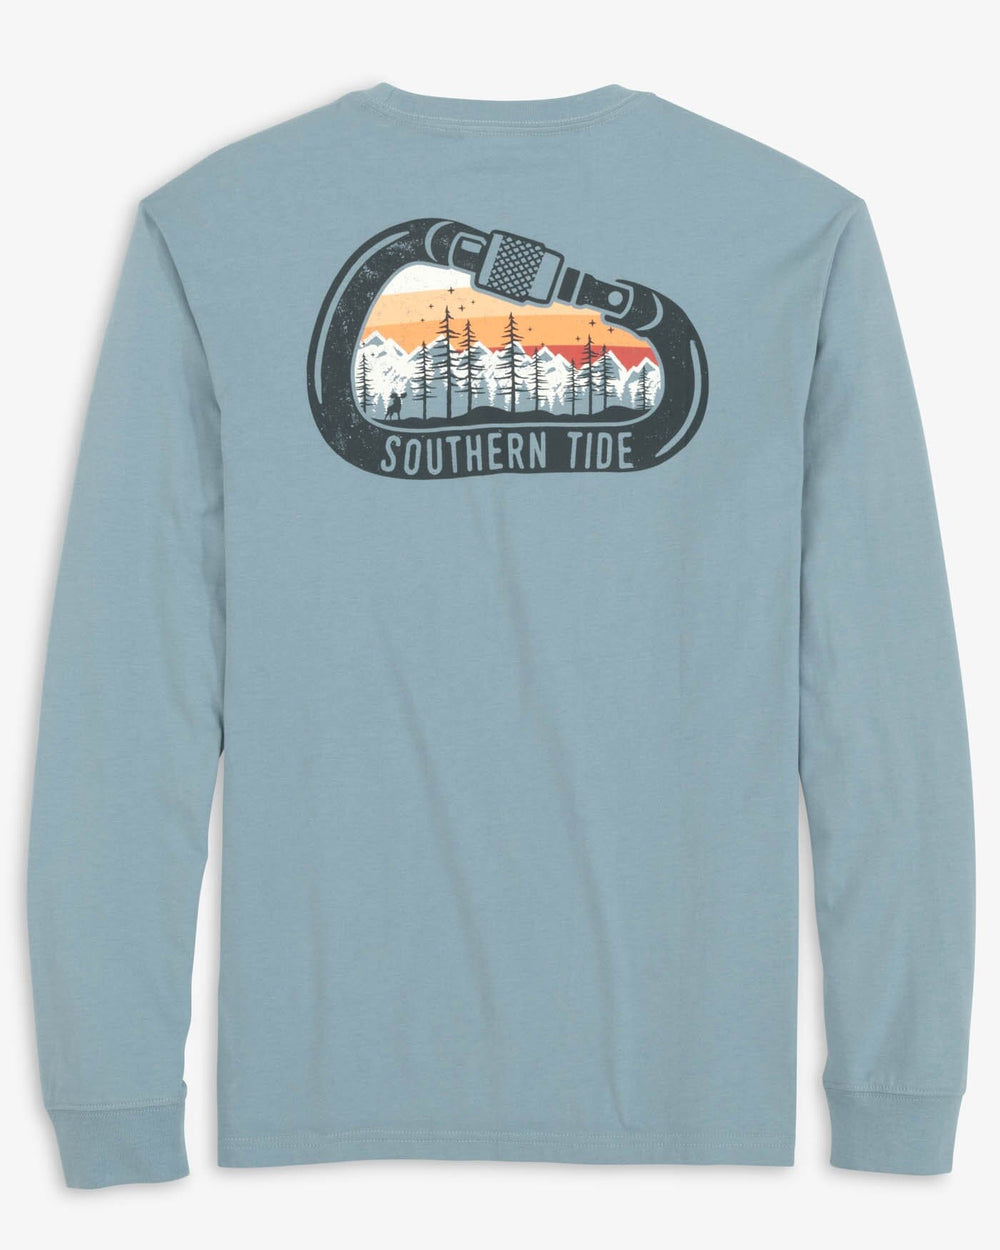 The back view of the Southern Tide Gradient Carabiner Long Sleeve T-Shirt by Southern Tide - Mountain Spring Blue